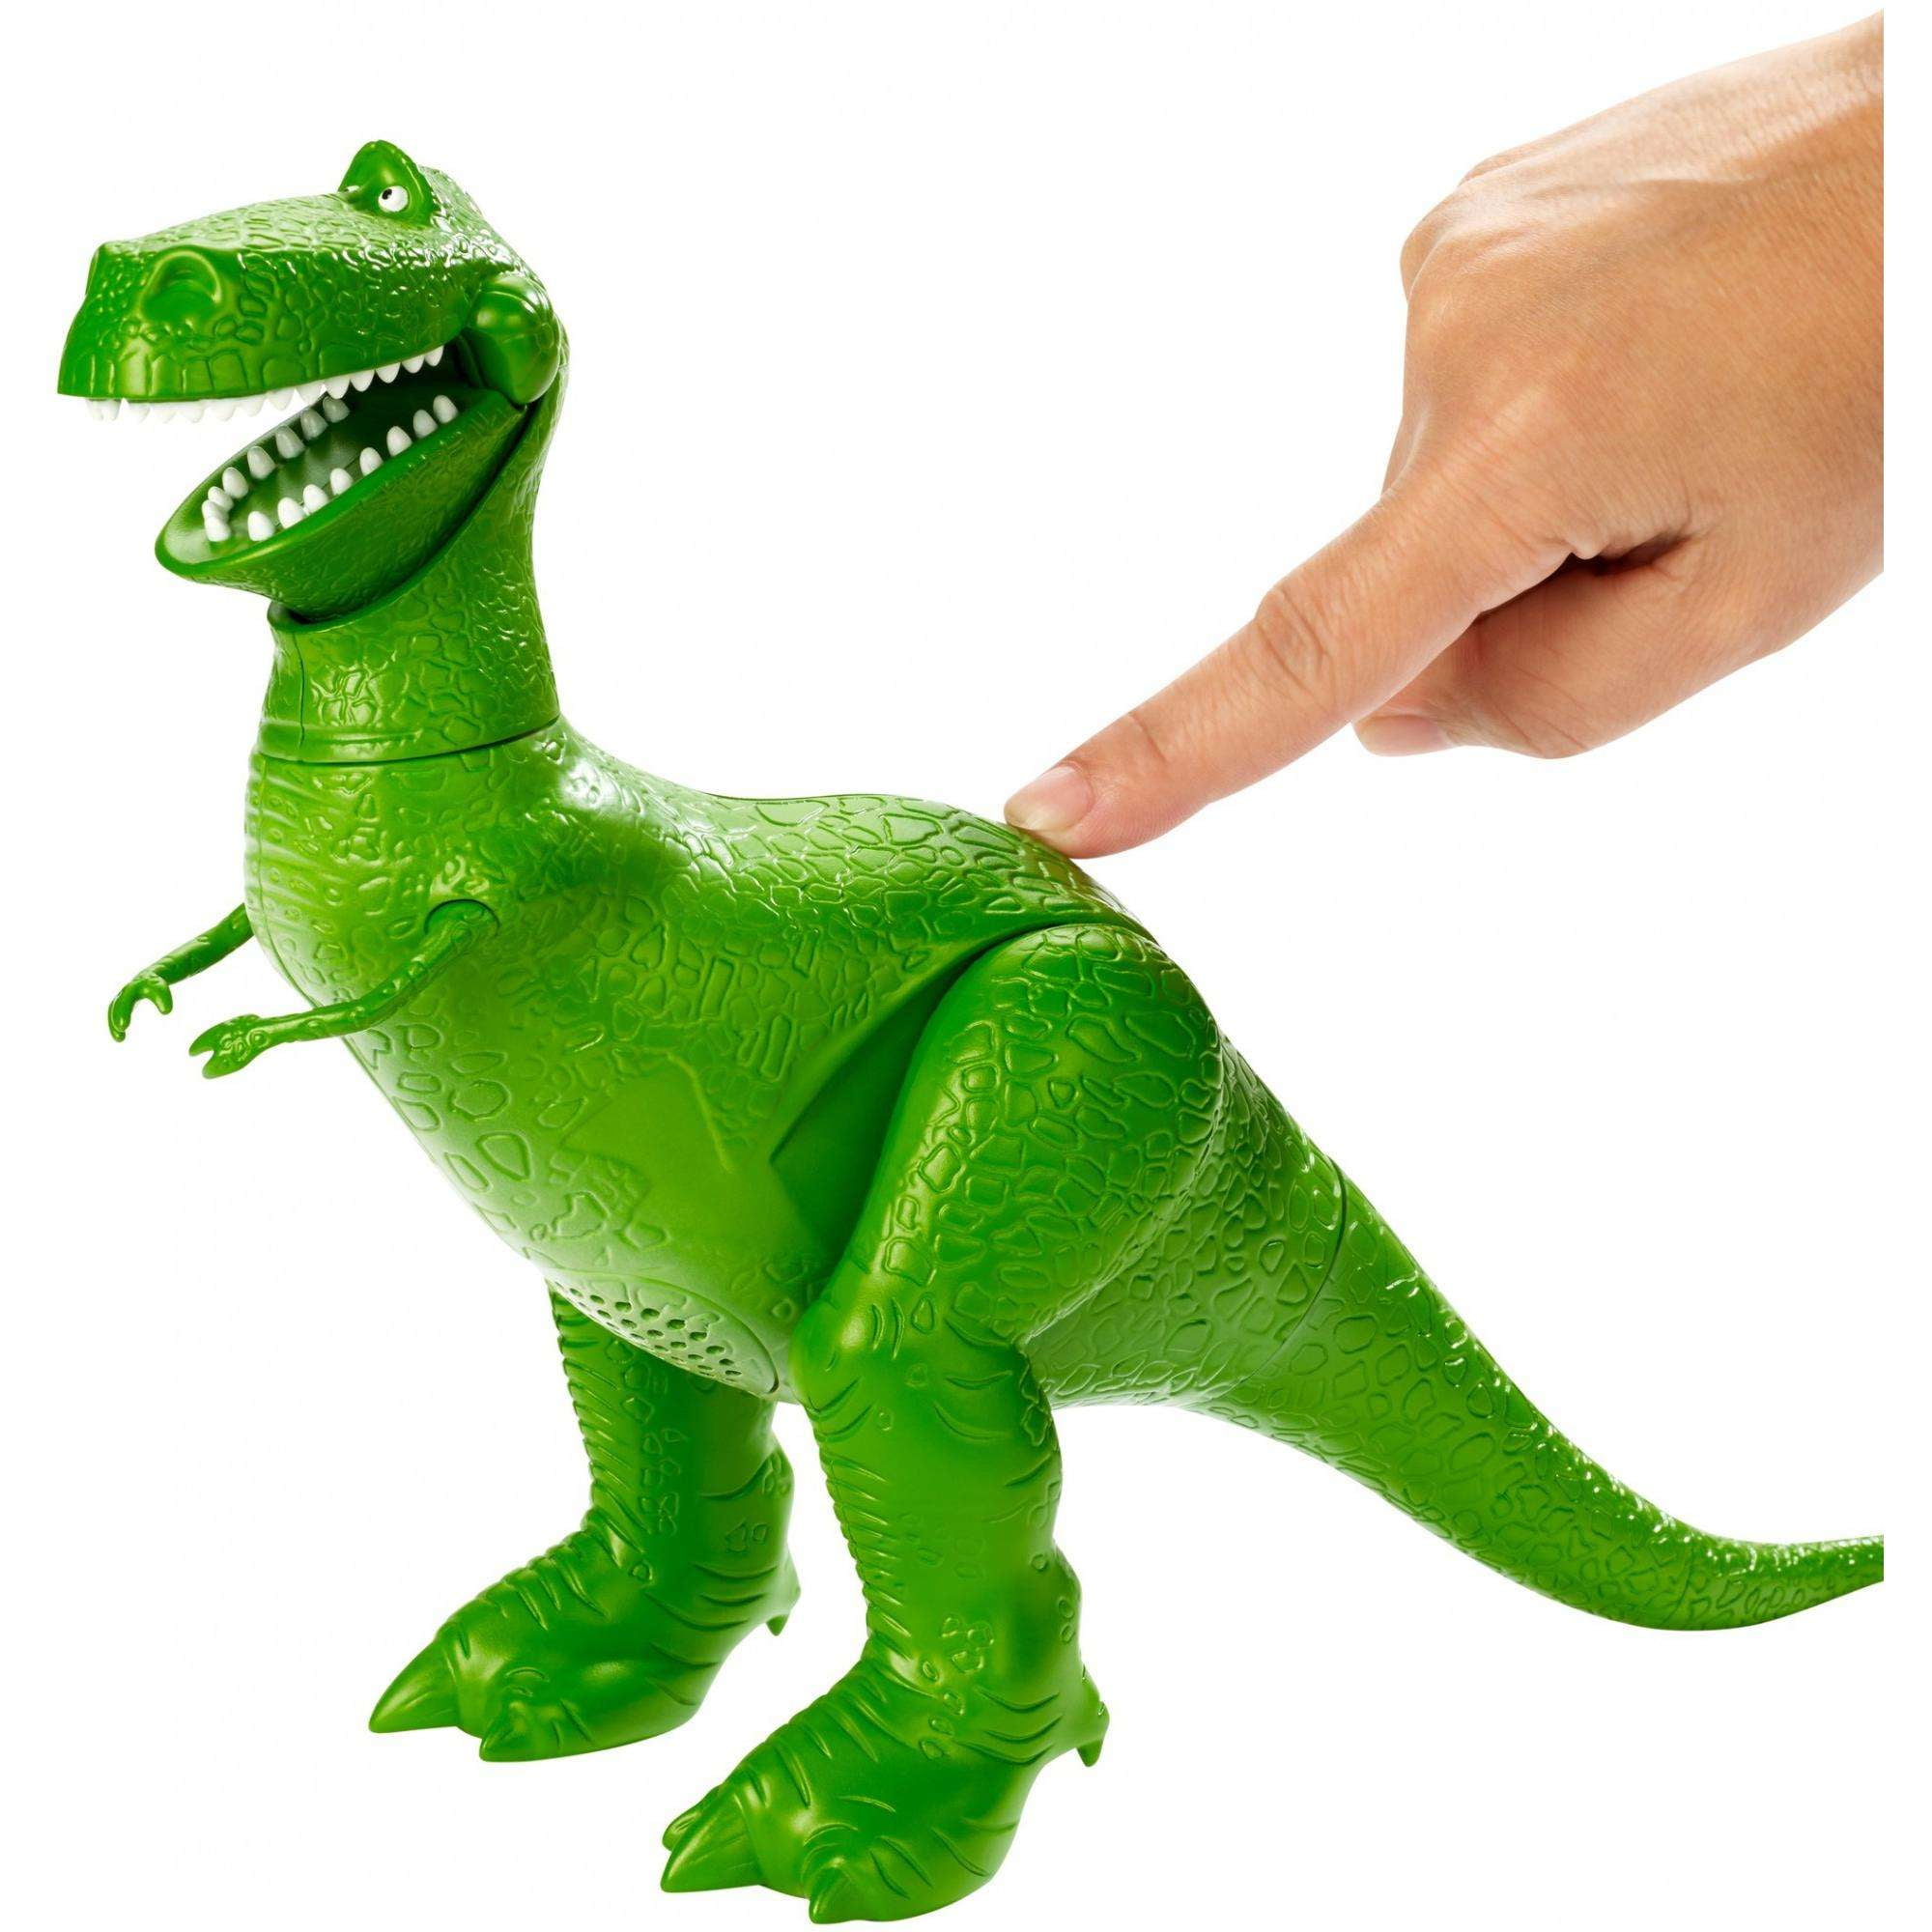 Disney/Pixar Toy Story Figure, 7-inch Talking Rex the Dinosaur with 20+  Phrases 